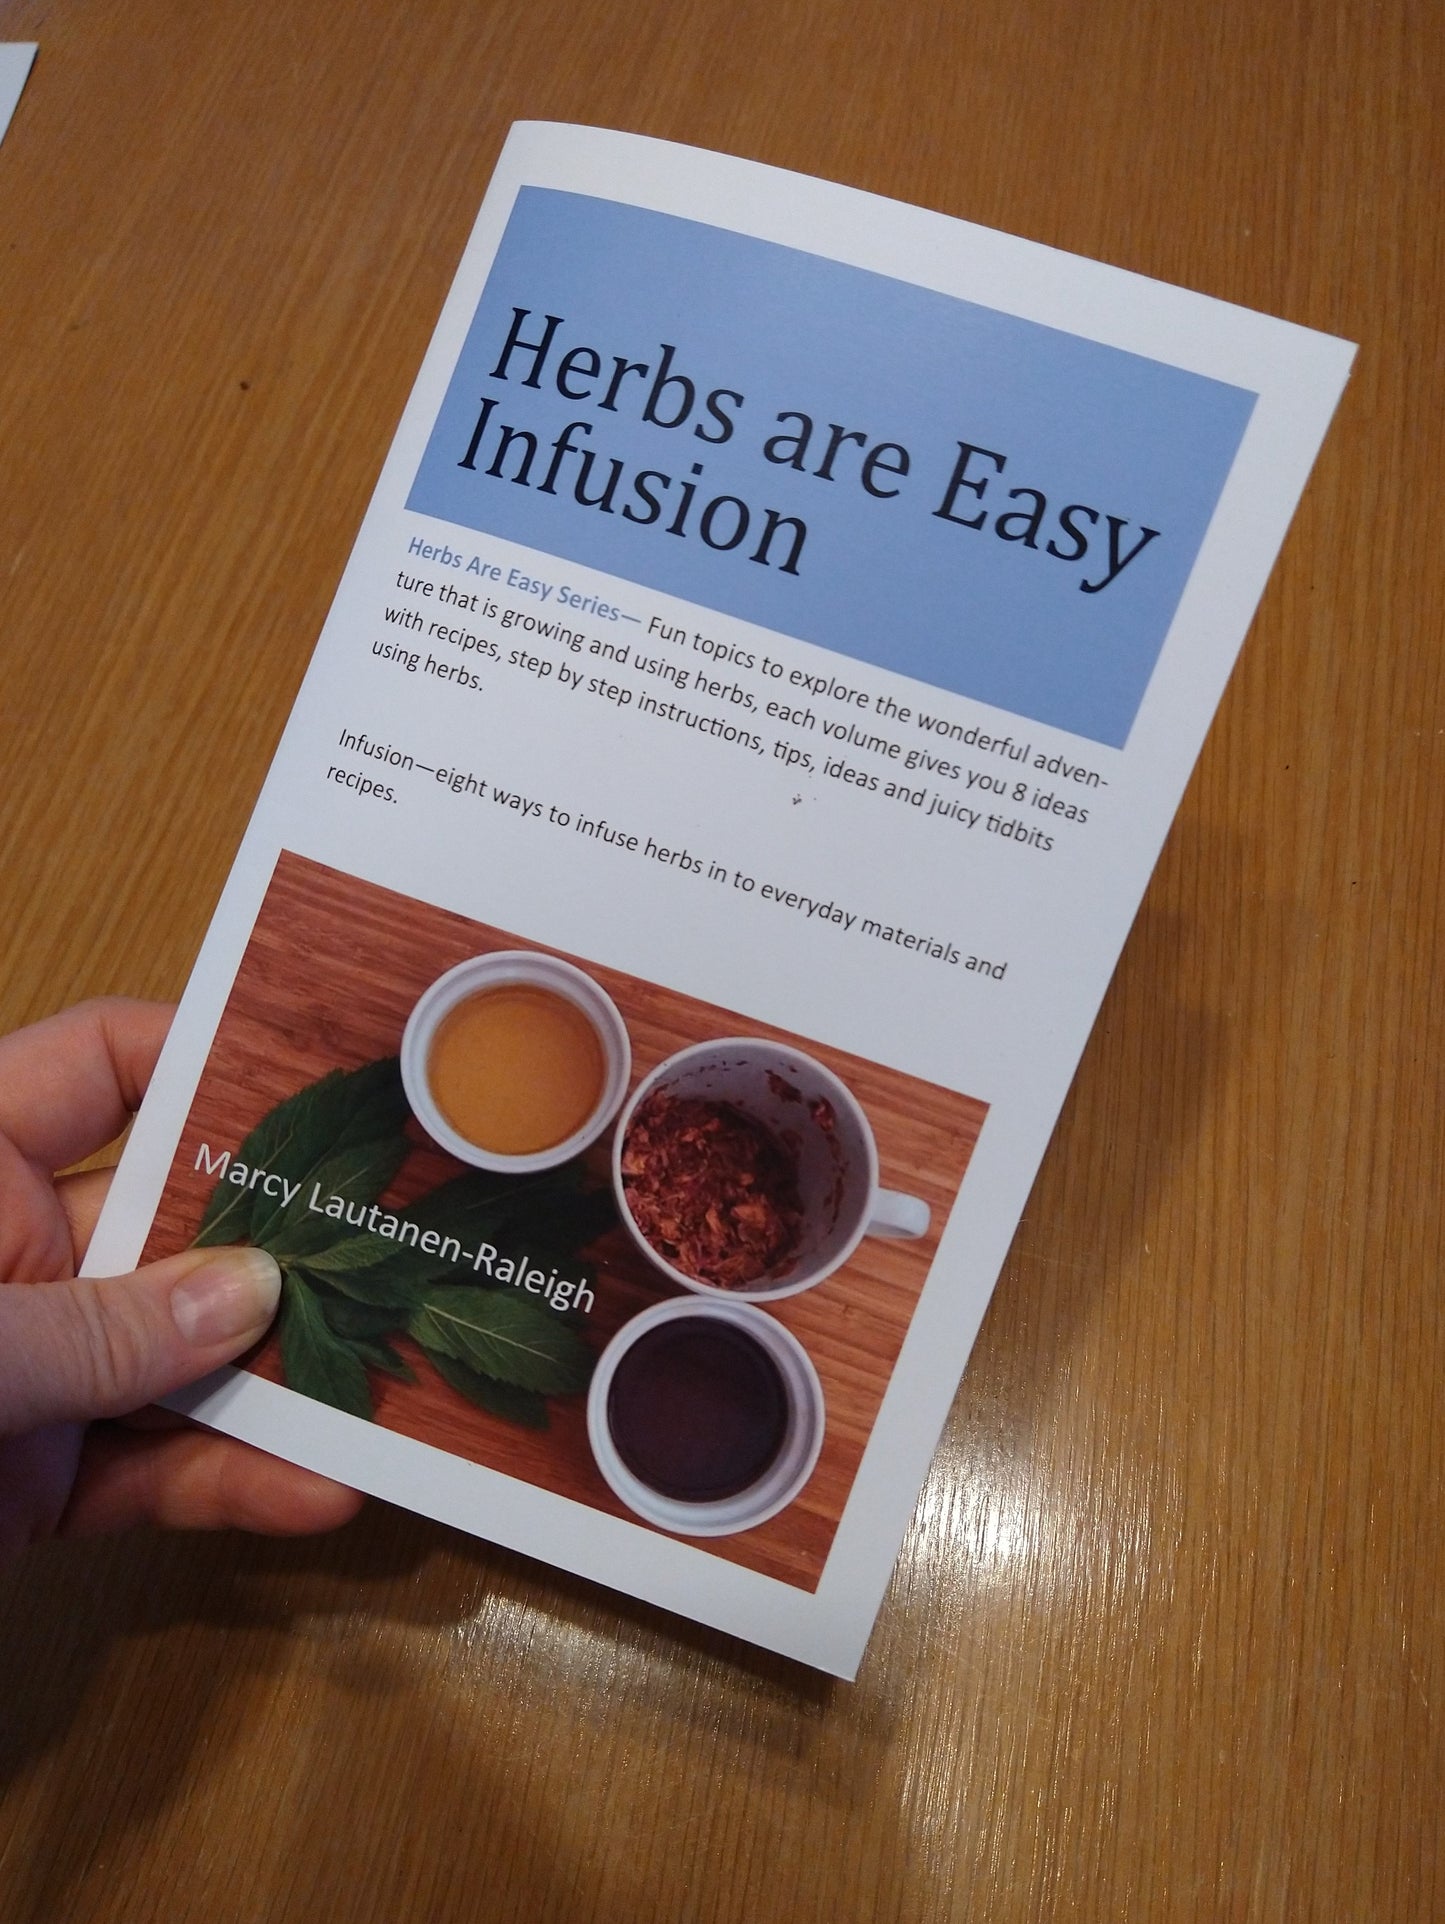 Book - Infusion - Herbs R Easy series